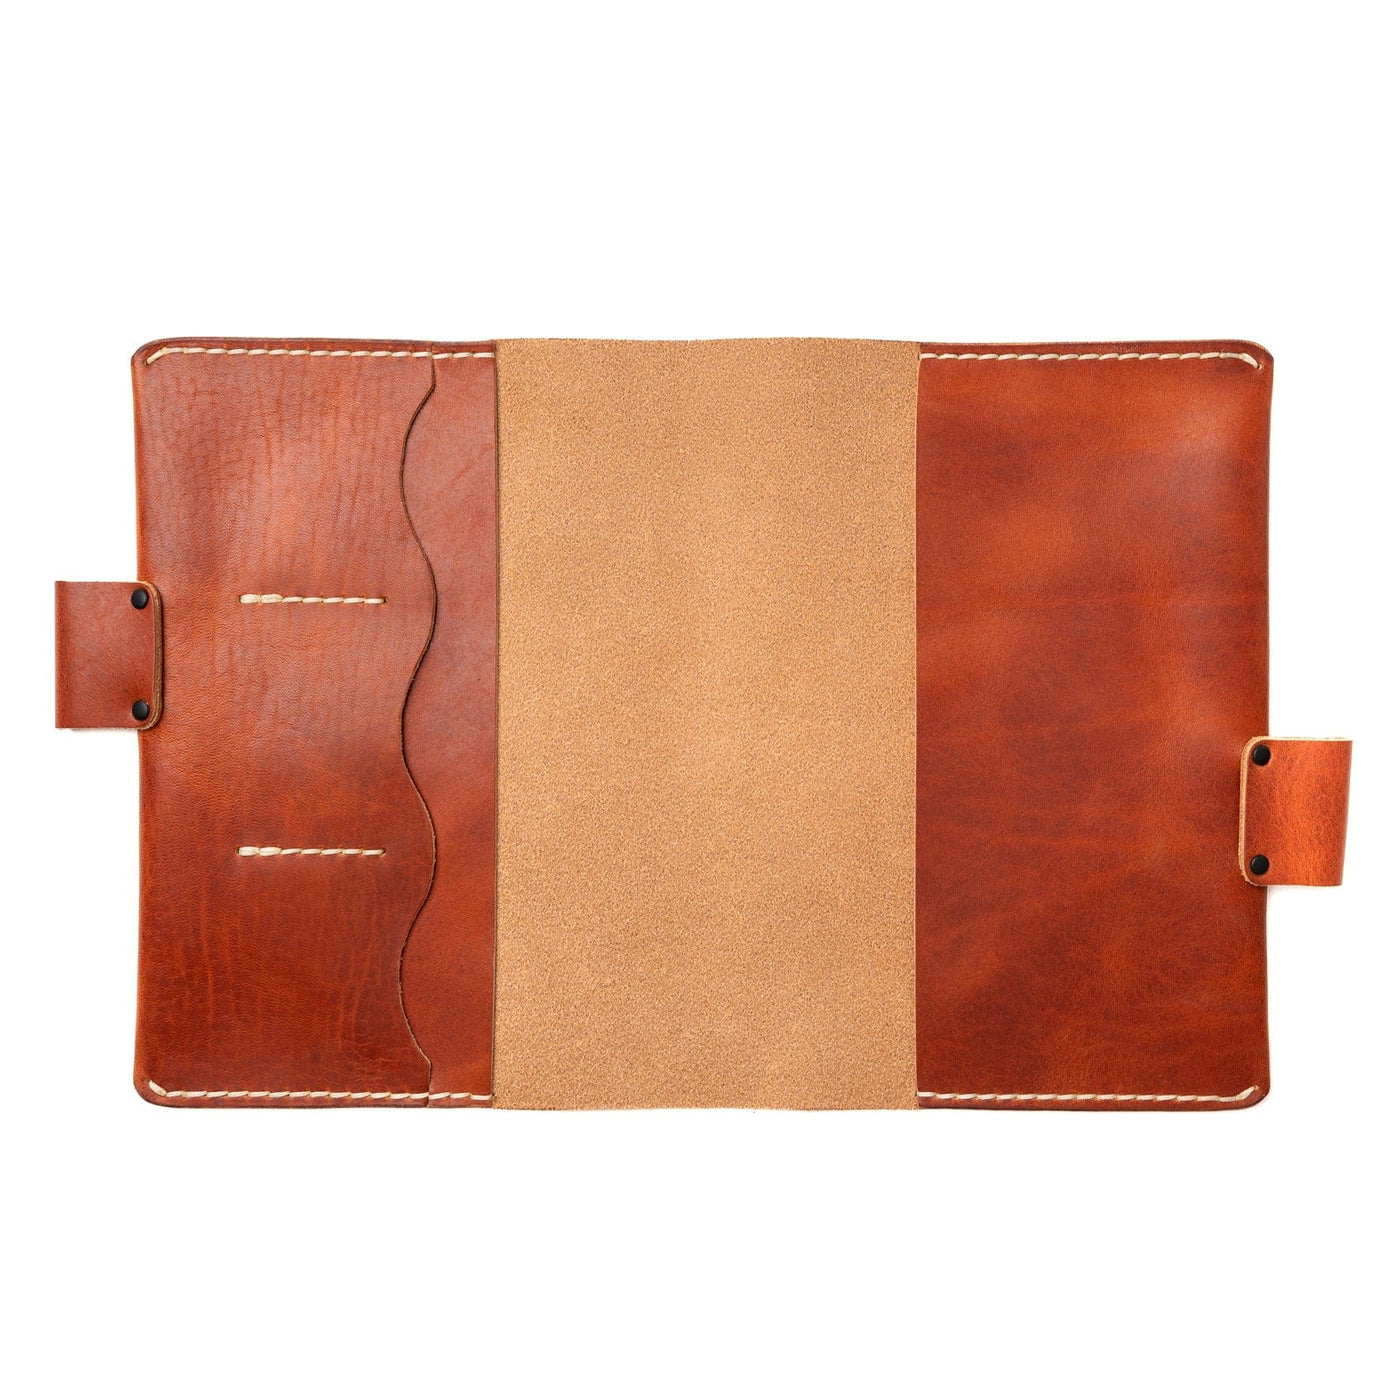 Leather Leuchtturm1917 A5 Notebook Cover - English Tan Popov Leather